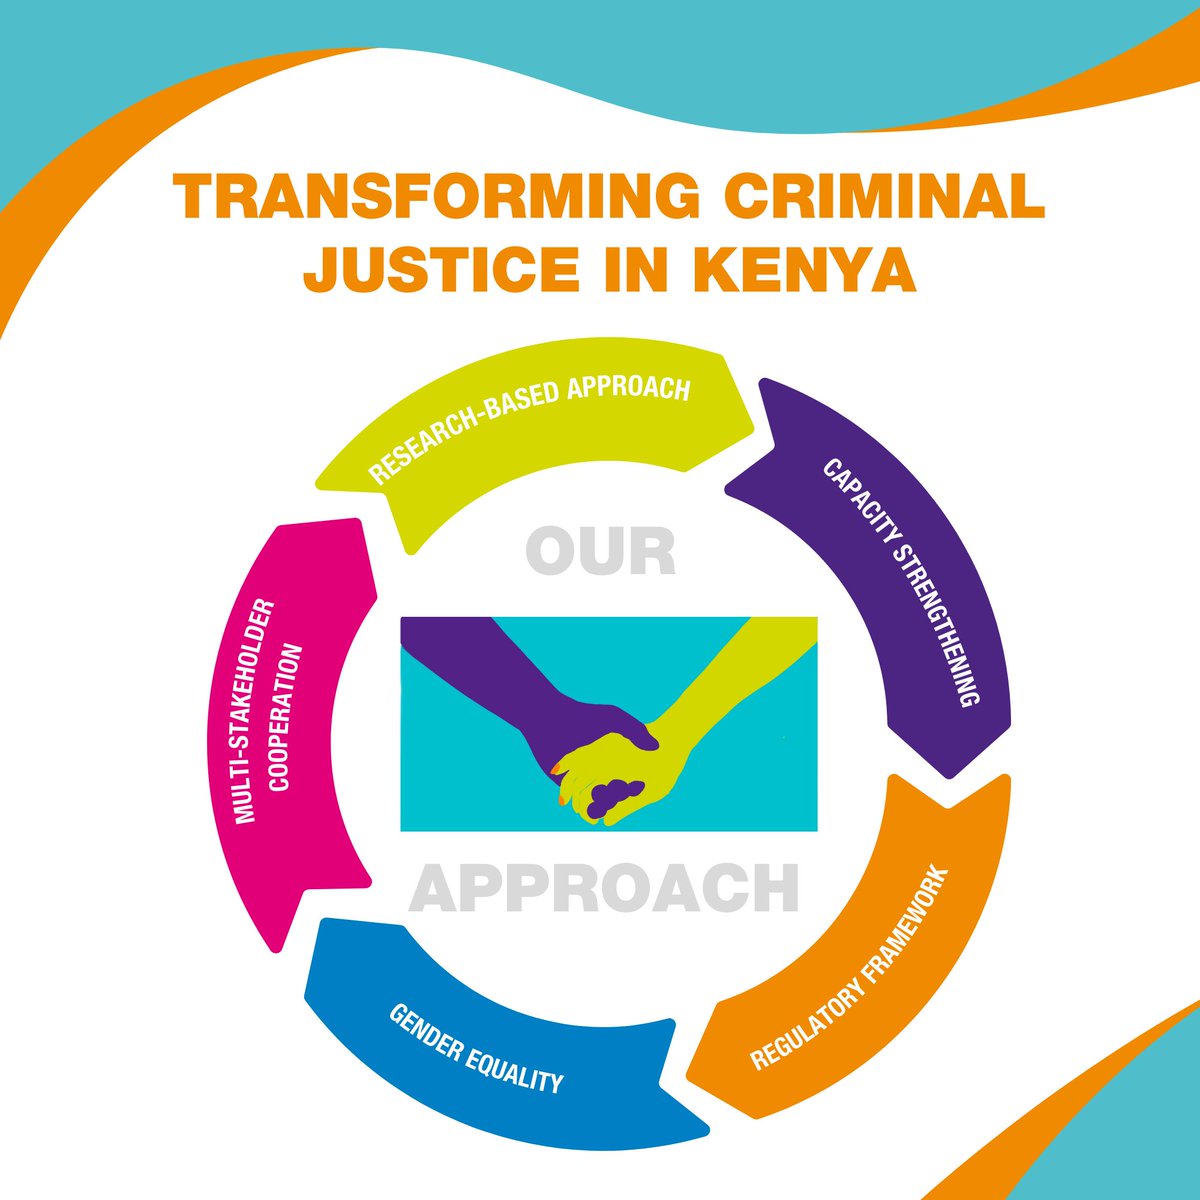 Over the past 10 years, @RWI_Nairobi, through funding from @SwedeninKE, has been supporting criminal justice actors to increase their compliance with International Human Rights Standards. Explore more of our work & impact in the criminal justice sector👉 rb.gy/hxds67